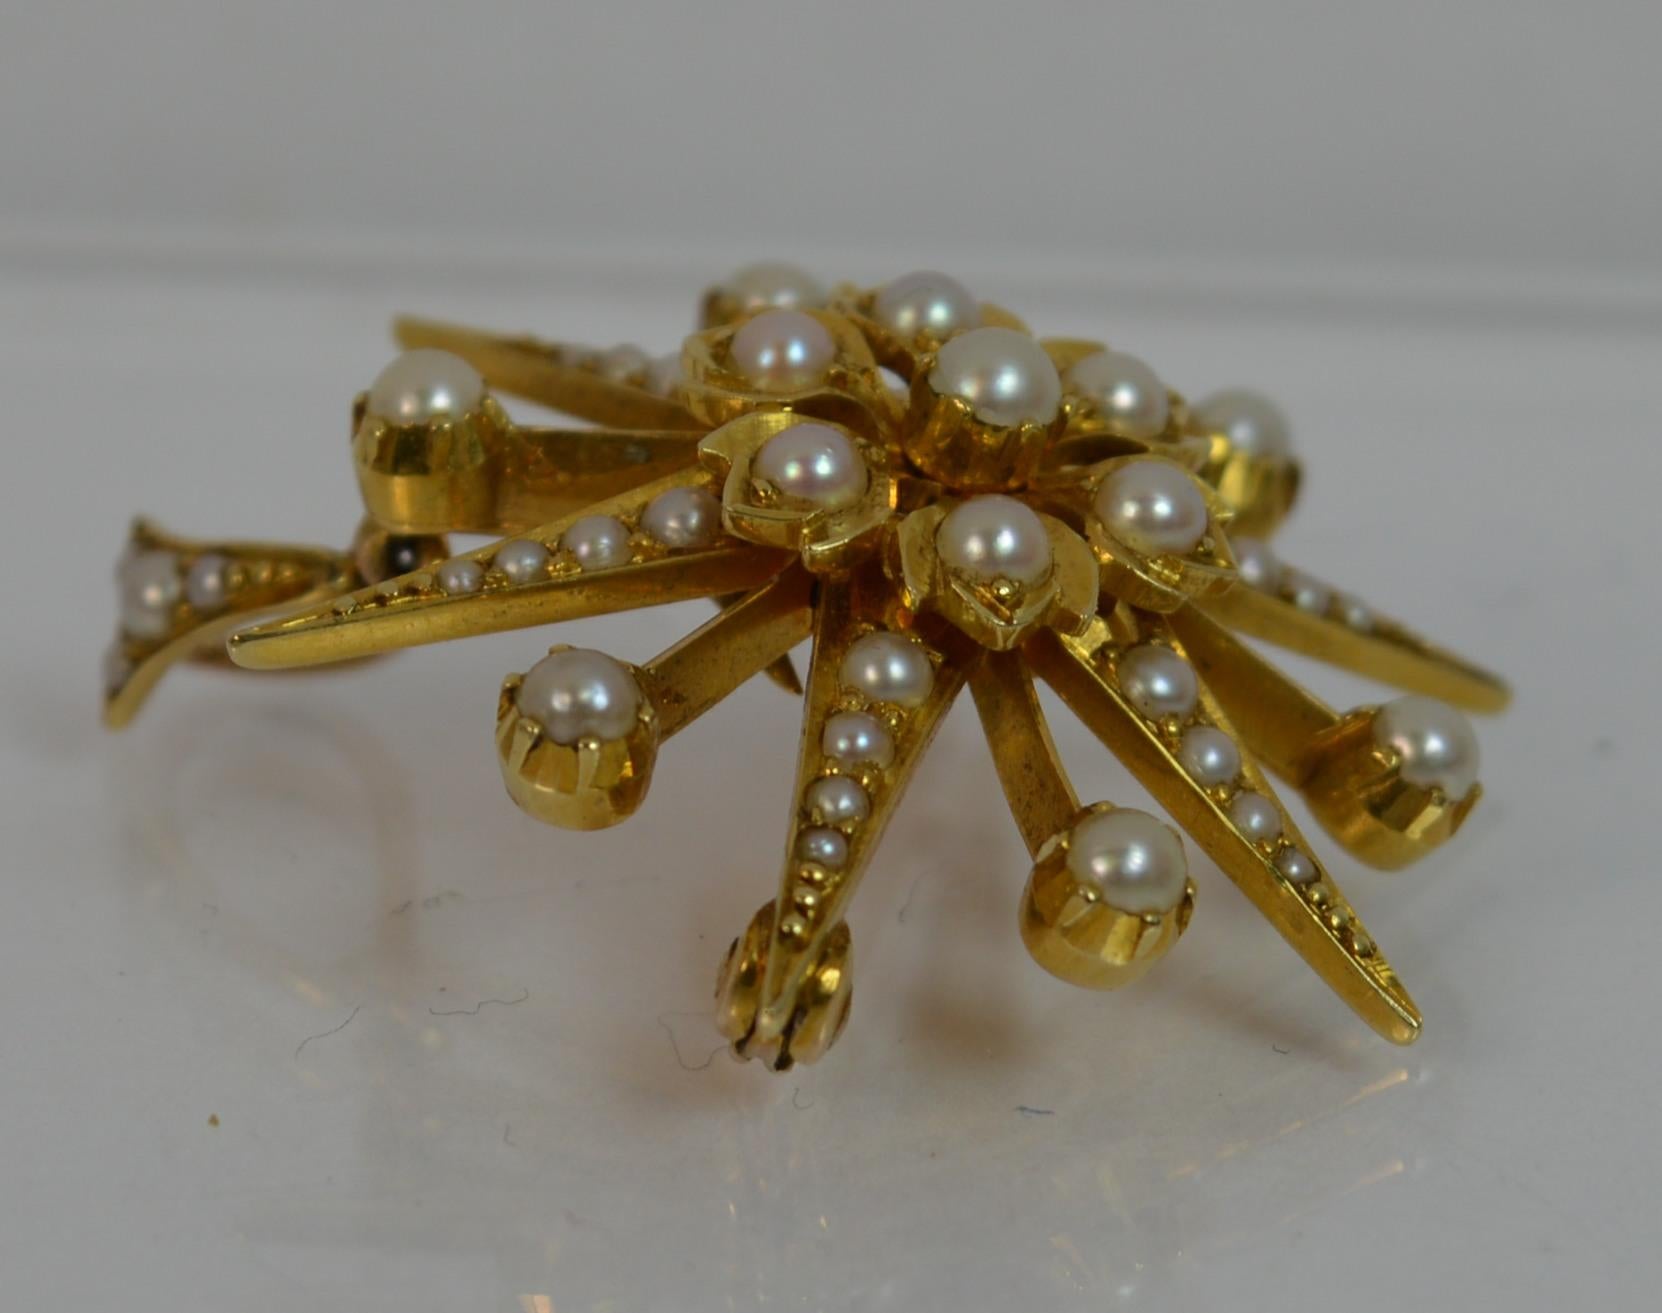 
A fantastic Victorian period pendant. Solid 15 carat yellow gold example. Set with a natural seed pearls throughout. Star shaped pendant. c1880. Very crisp example. 

CONDITION ; Very good. Clean piece. Crisp design. Issue free. Please view